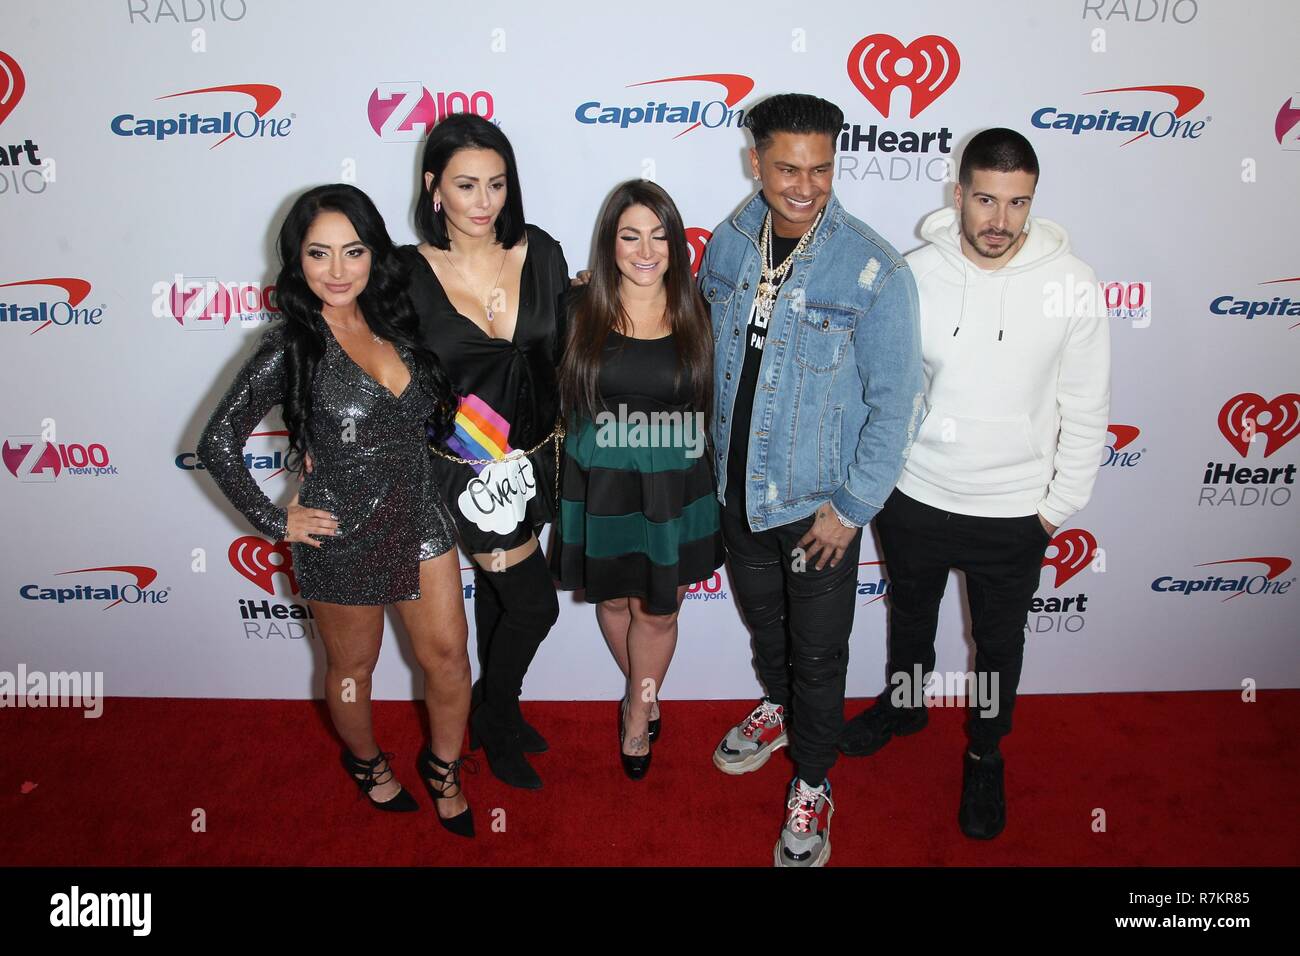 Angelina Pivarnick, Jennifer 'JWoww' Farley, Deena Cortese, Paul DelVecchio, Vinny Guadagnino at arrivals for Z100's Jingle Ball 2018 Presented by Capital One, Madison Square Garden, New York, NY December 7, 2018. Photo By: Steve Mack/Everett Collection Stock Photo